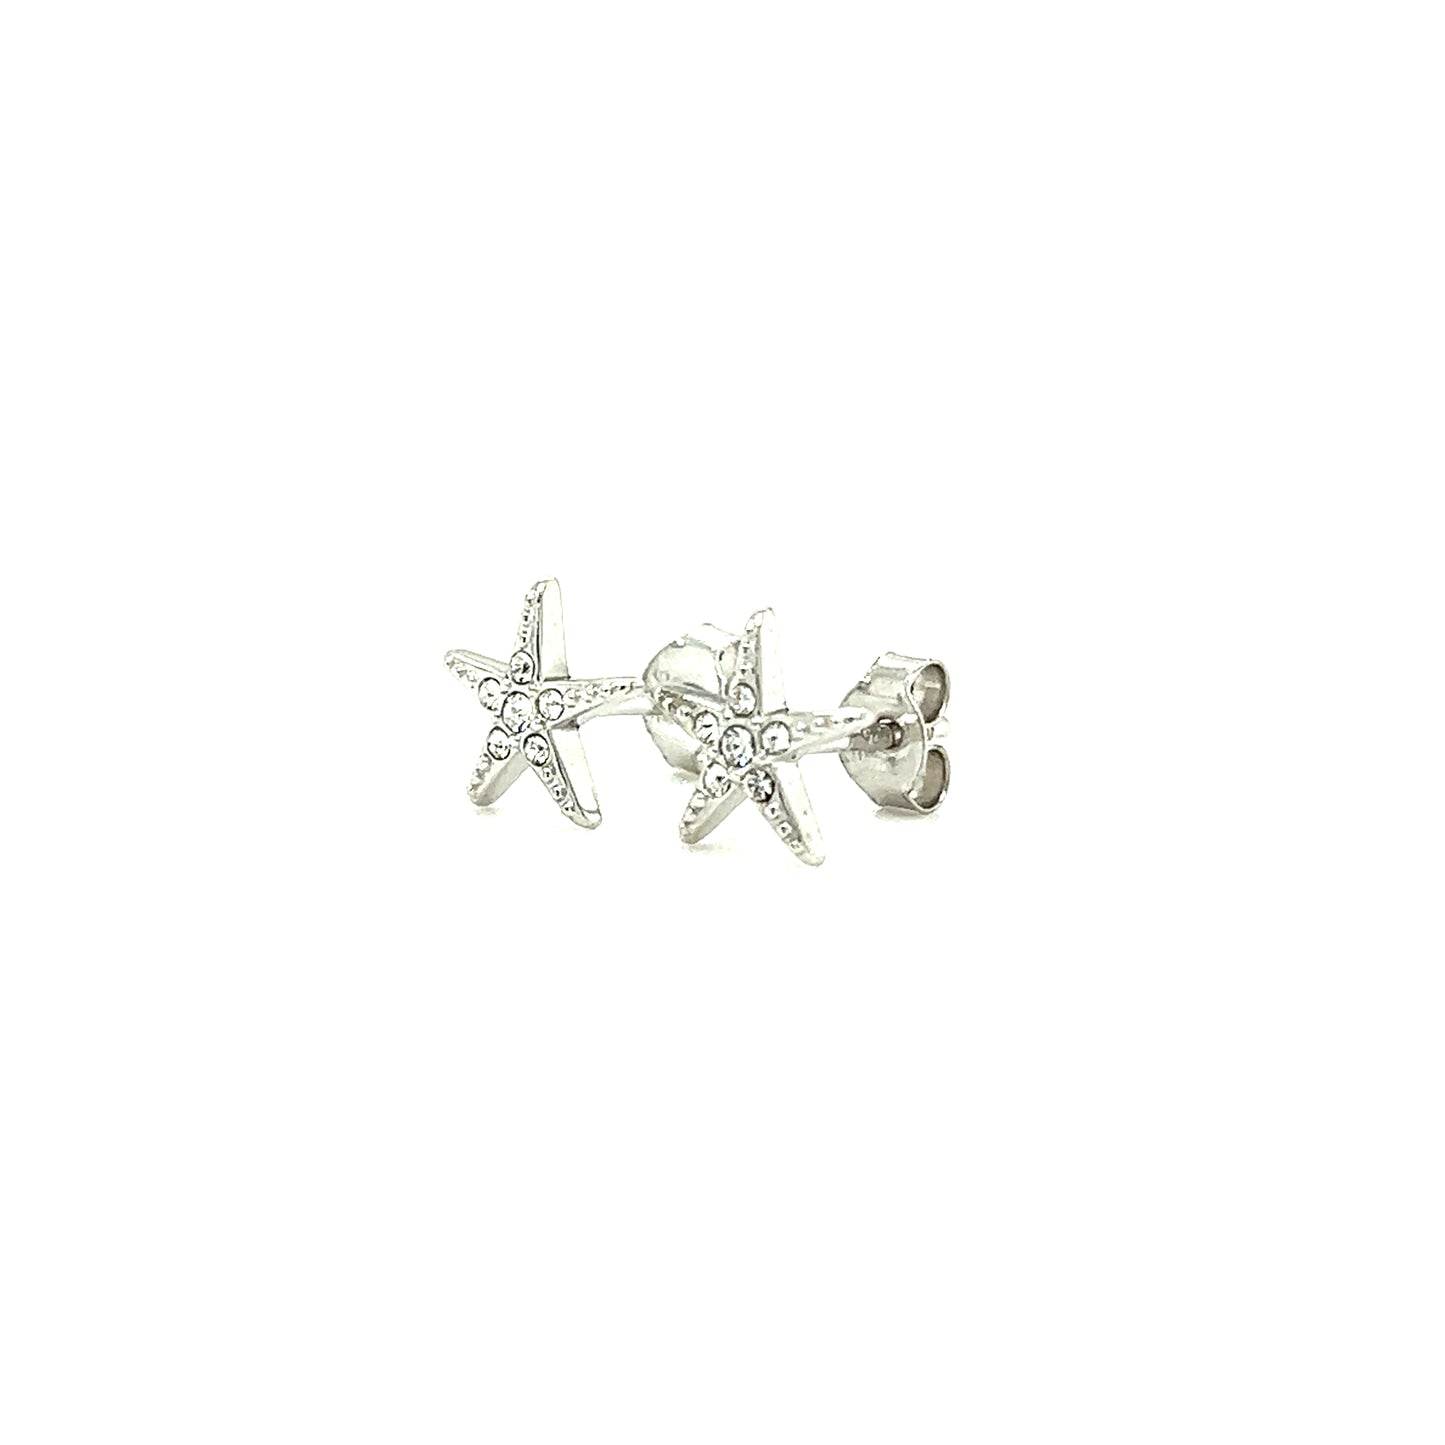 Starfish Stud Earrings with White Crystals in Sterling Silver Right Side View